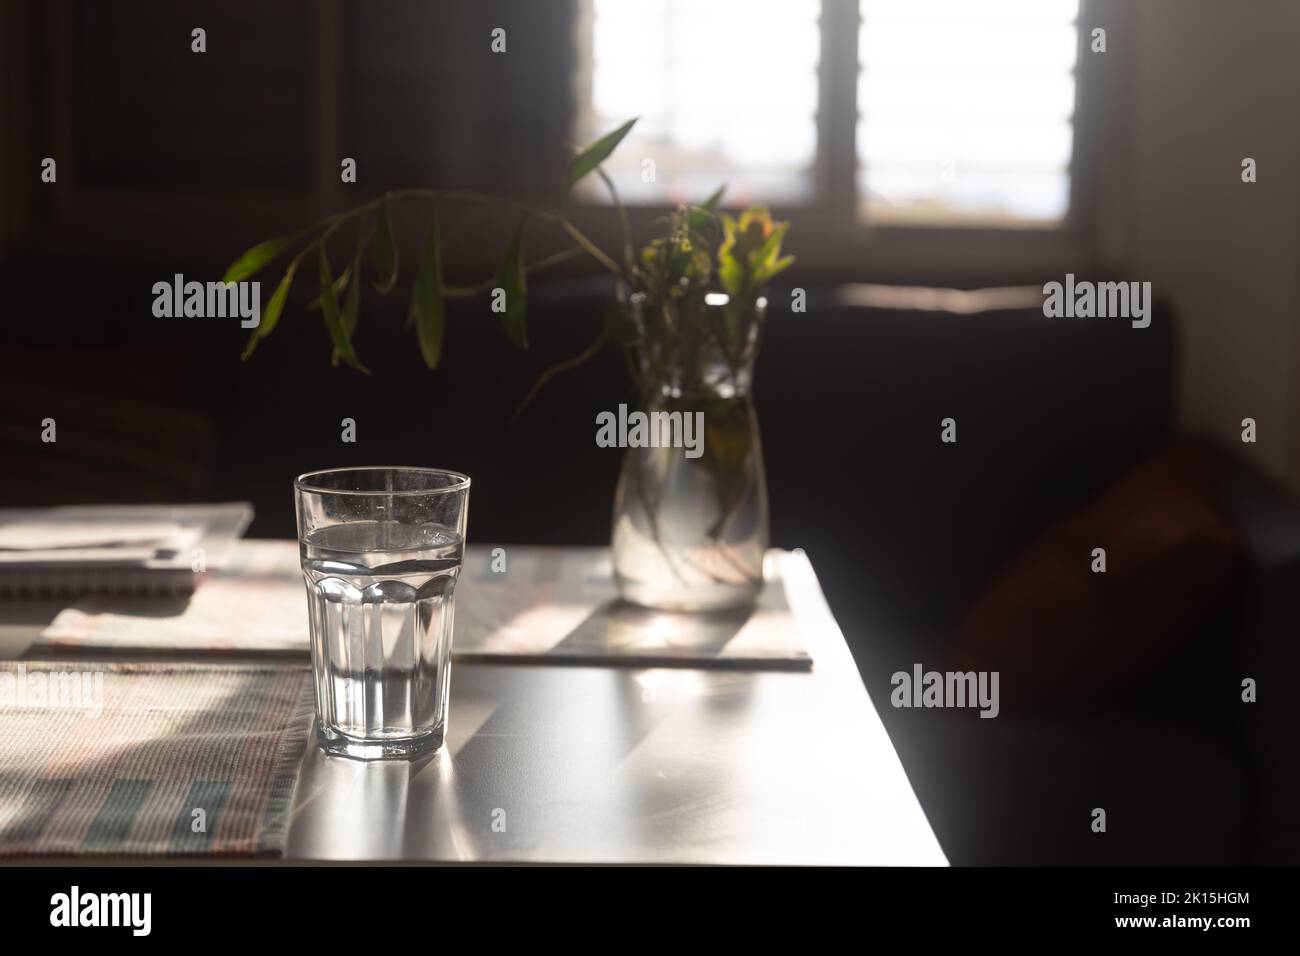 A glass of water and a bottle in the background against a backlit window with jalousie Stock Photo